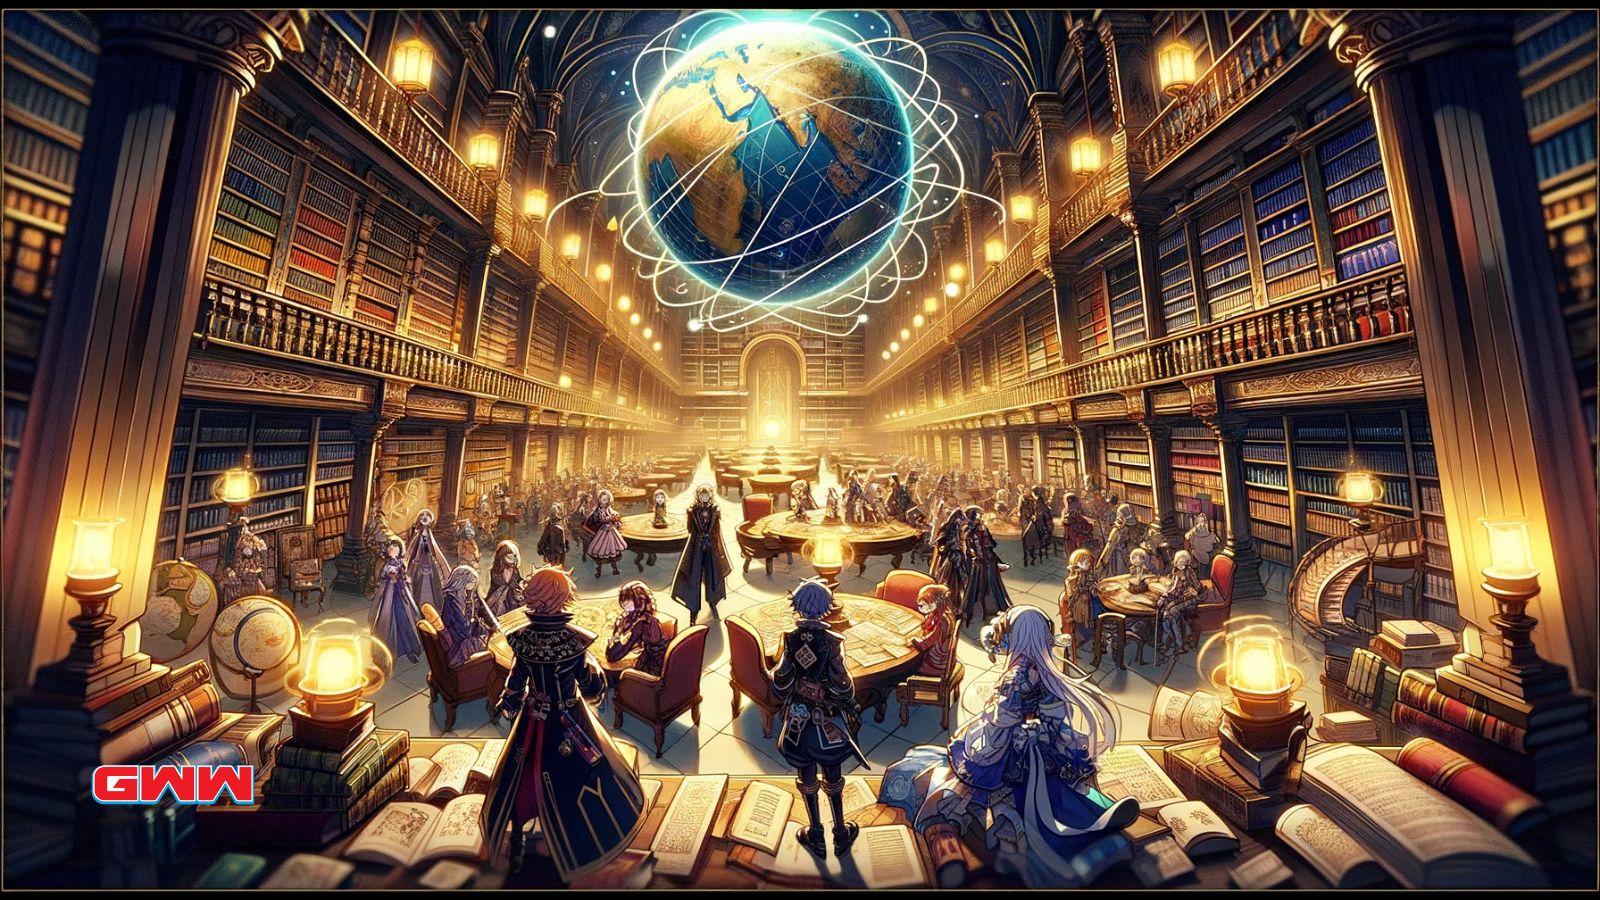 A dynamic and expansive anime-style scene showing a vast library filled with endless shelves of books, scrolls, and maps